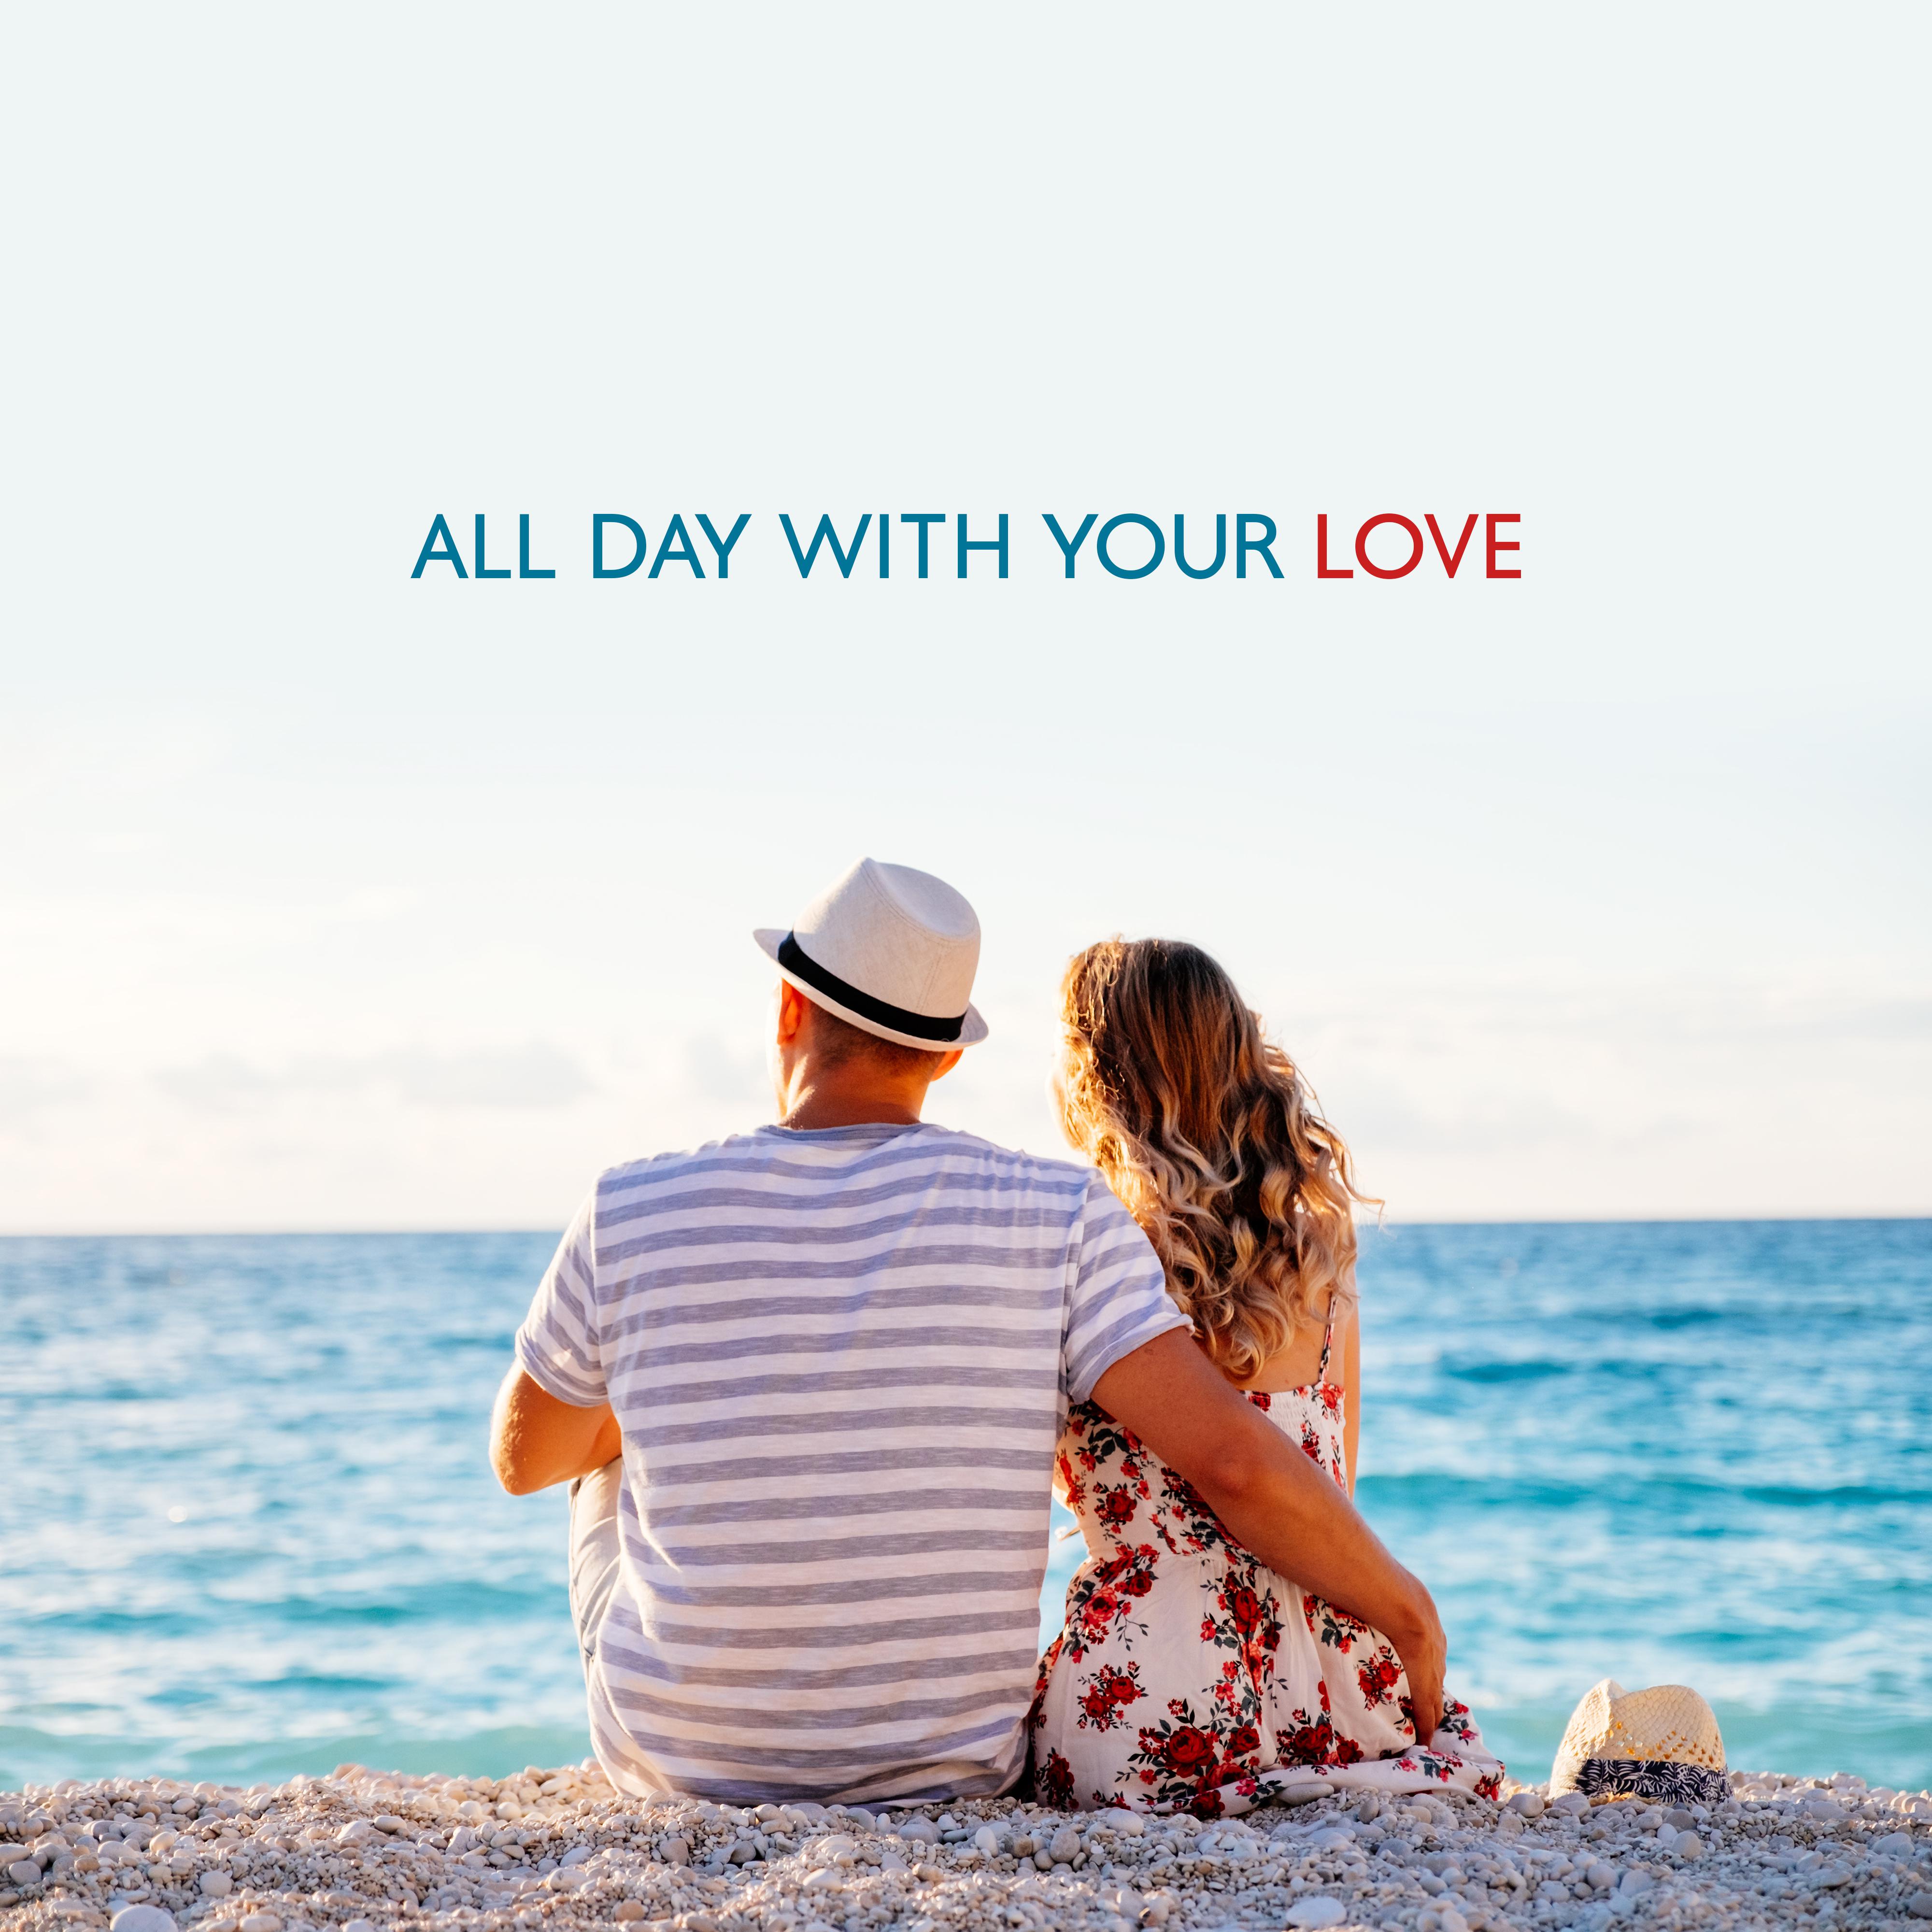 All Day wtih Your Love  Instrumental Smooth Jazz for Good Day Together, Romantic  Happy Melodies